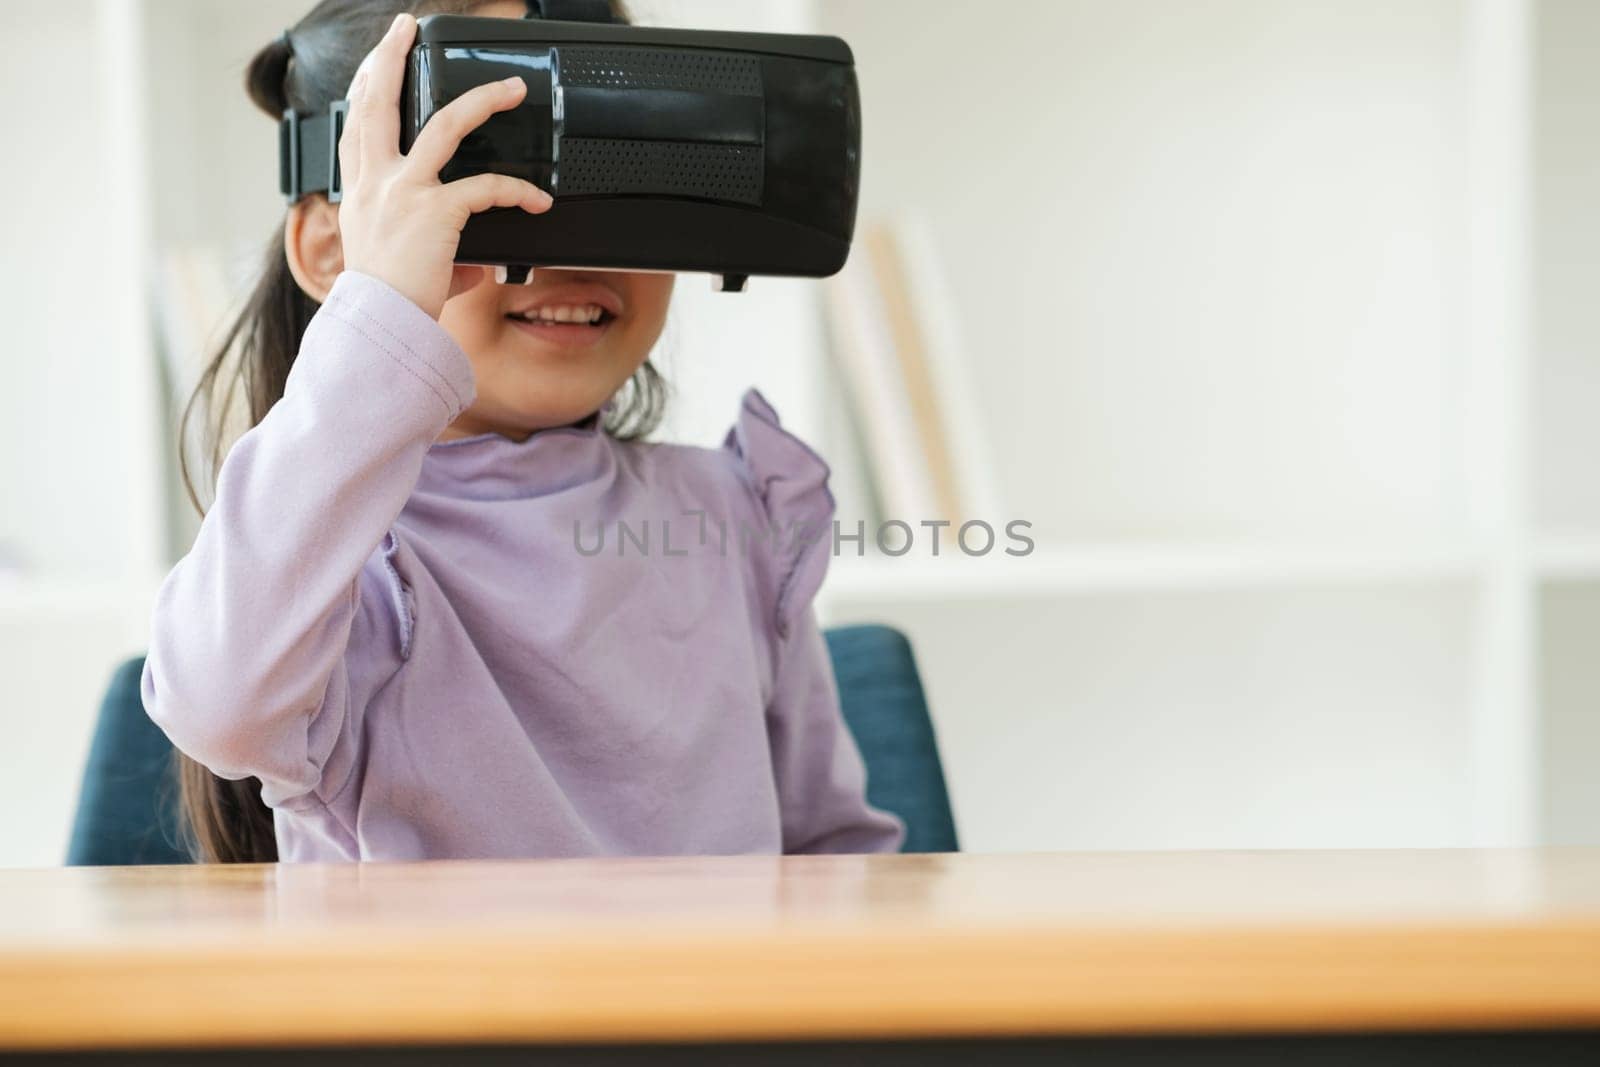 An elementary aged girl uses a virtual reality headset to enhance learning experience with excitement. Marketing for VR products, educational technology content.